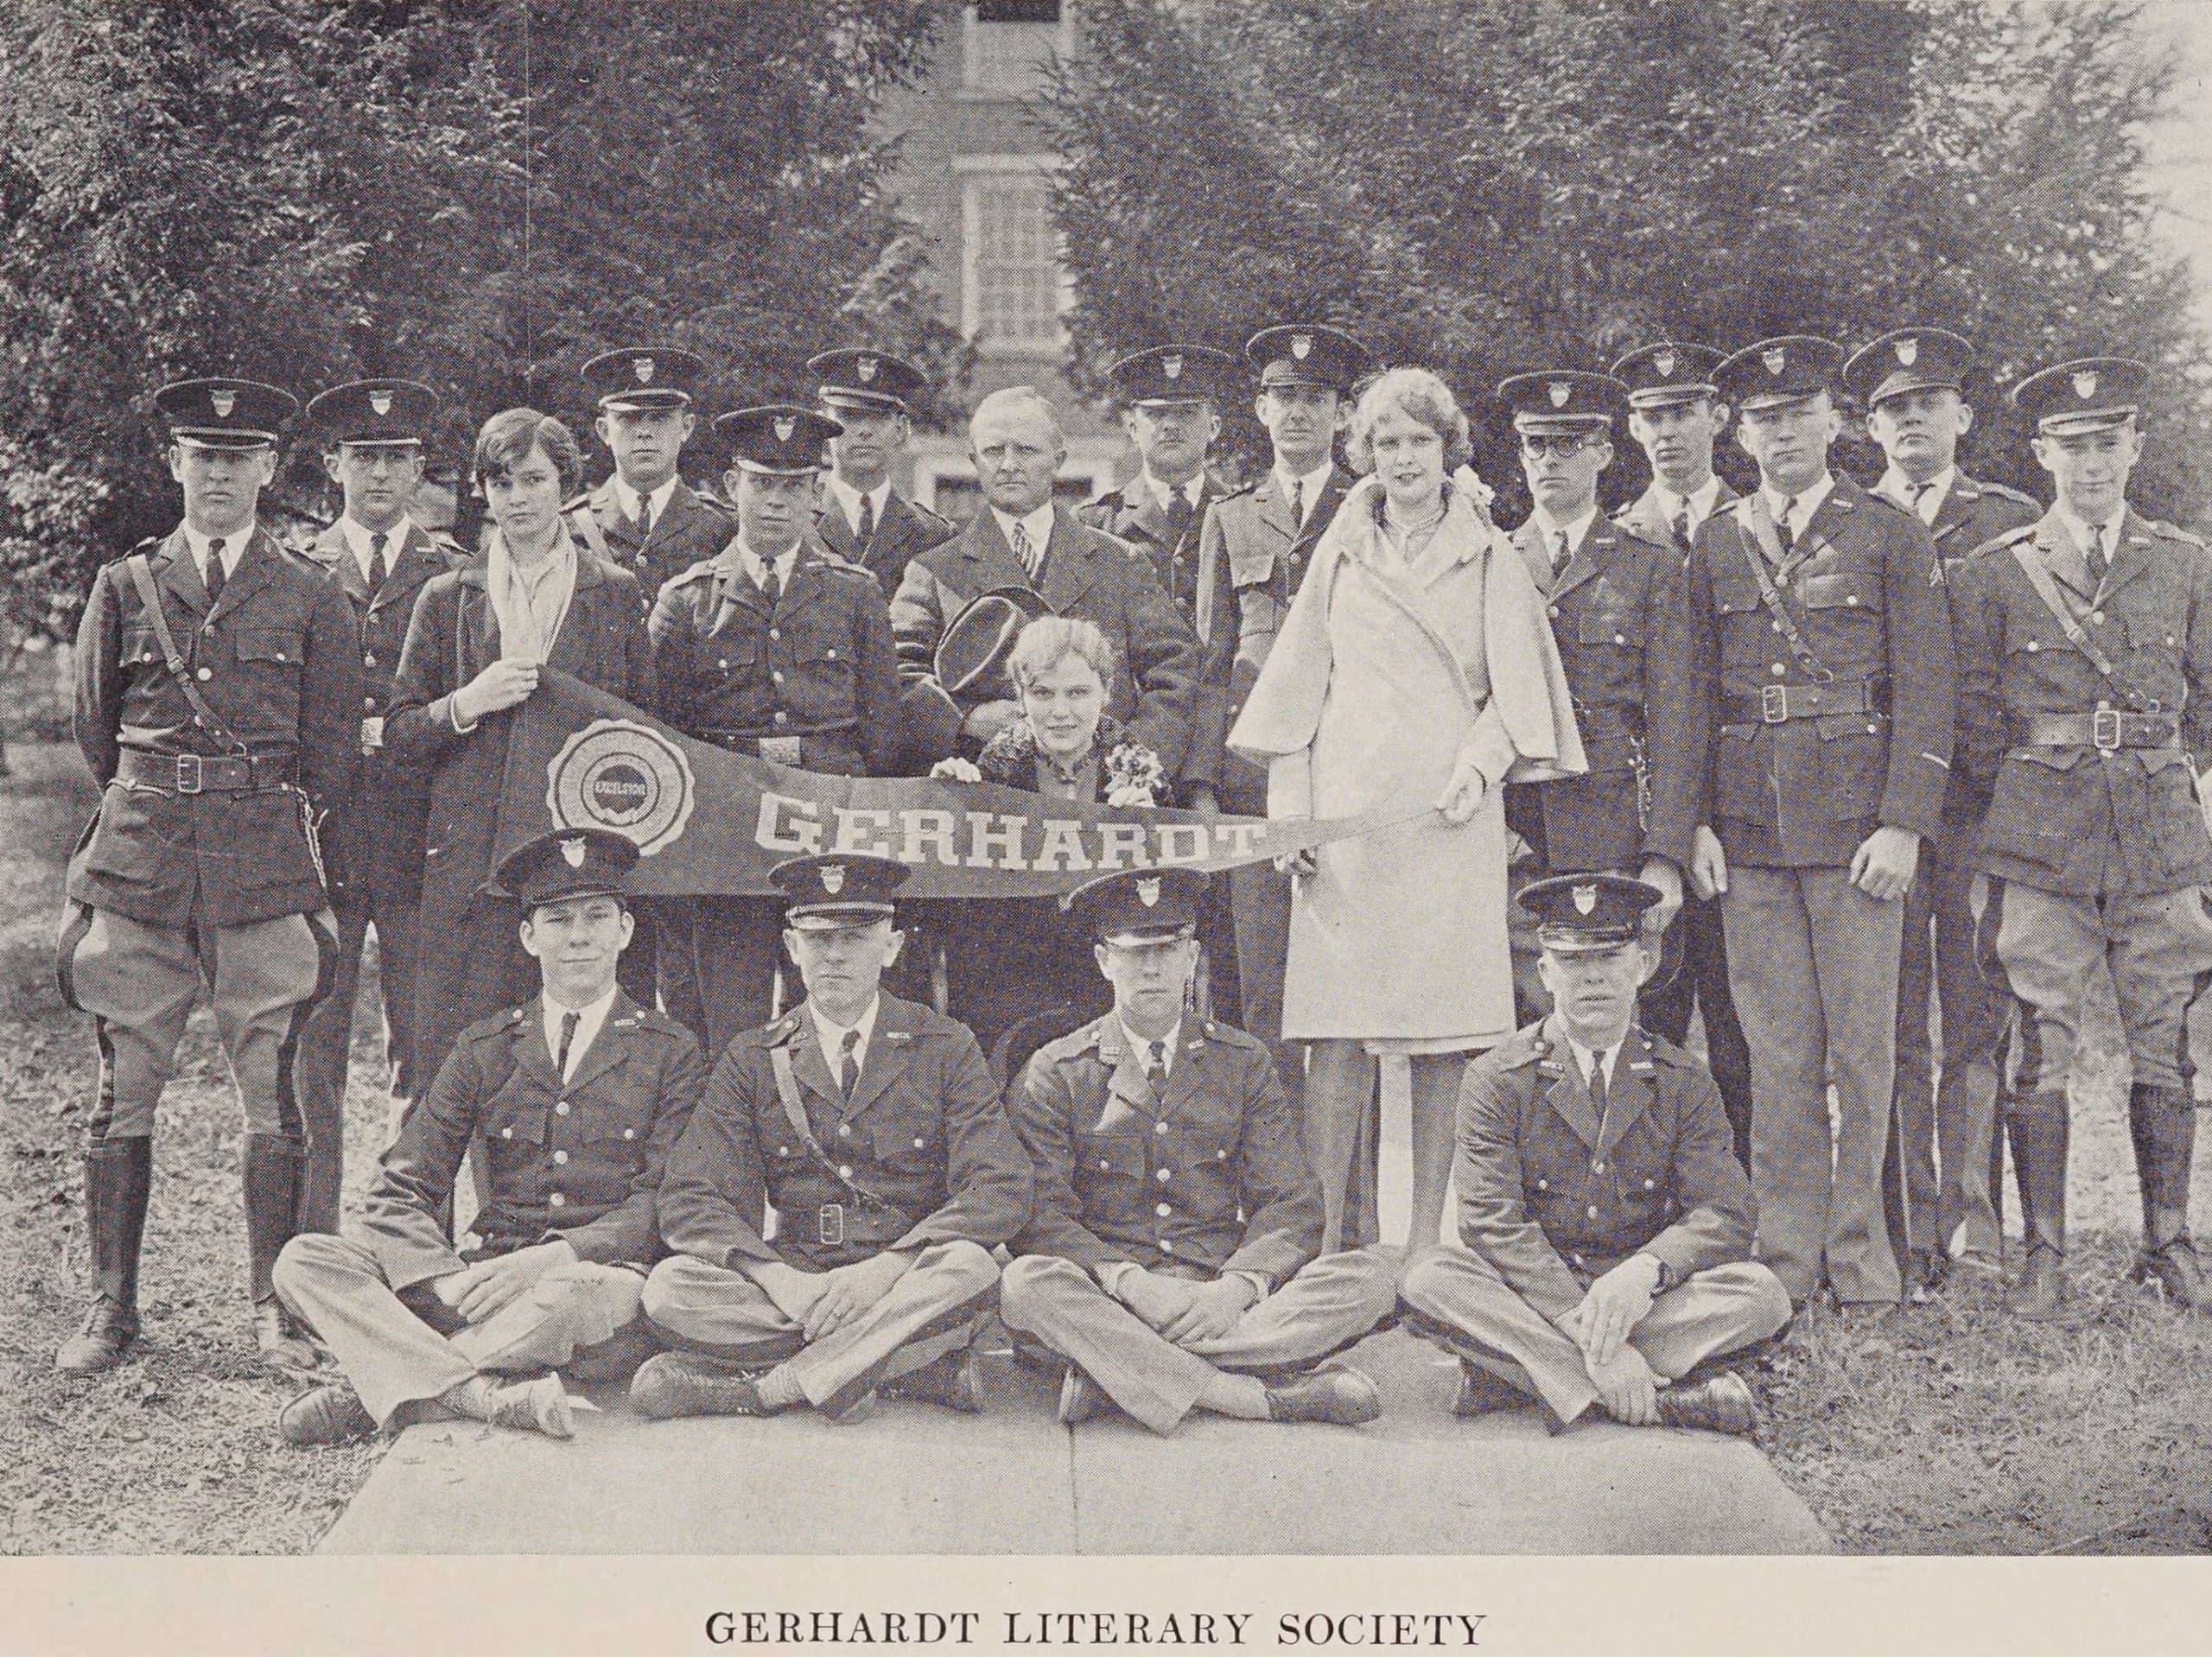 Group photograph of students of the Gerhardt Literary Society holding a pennant with "Gerhardt" on it.